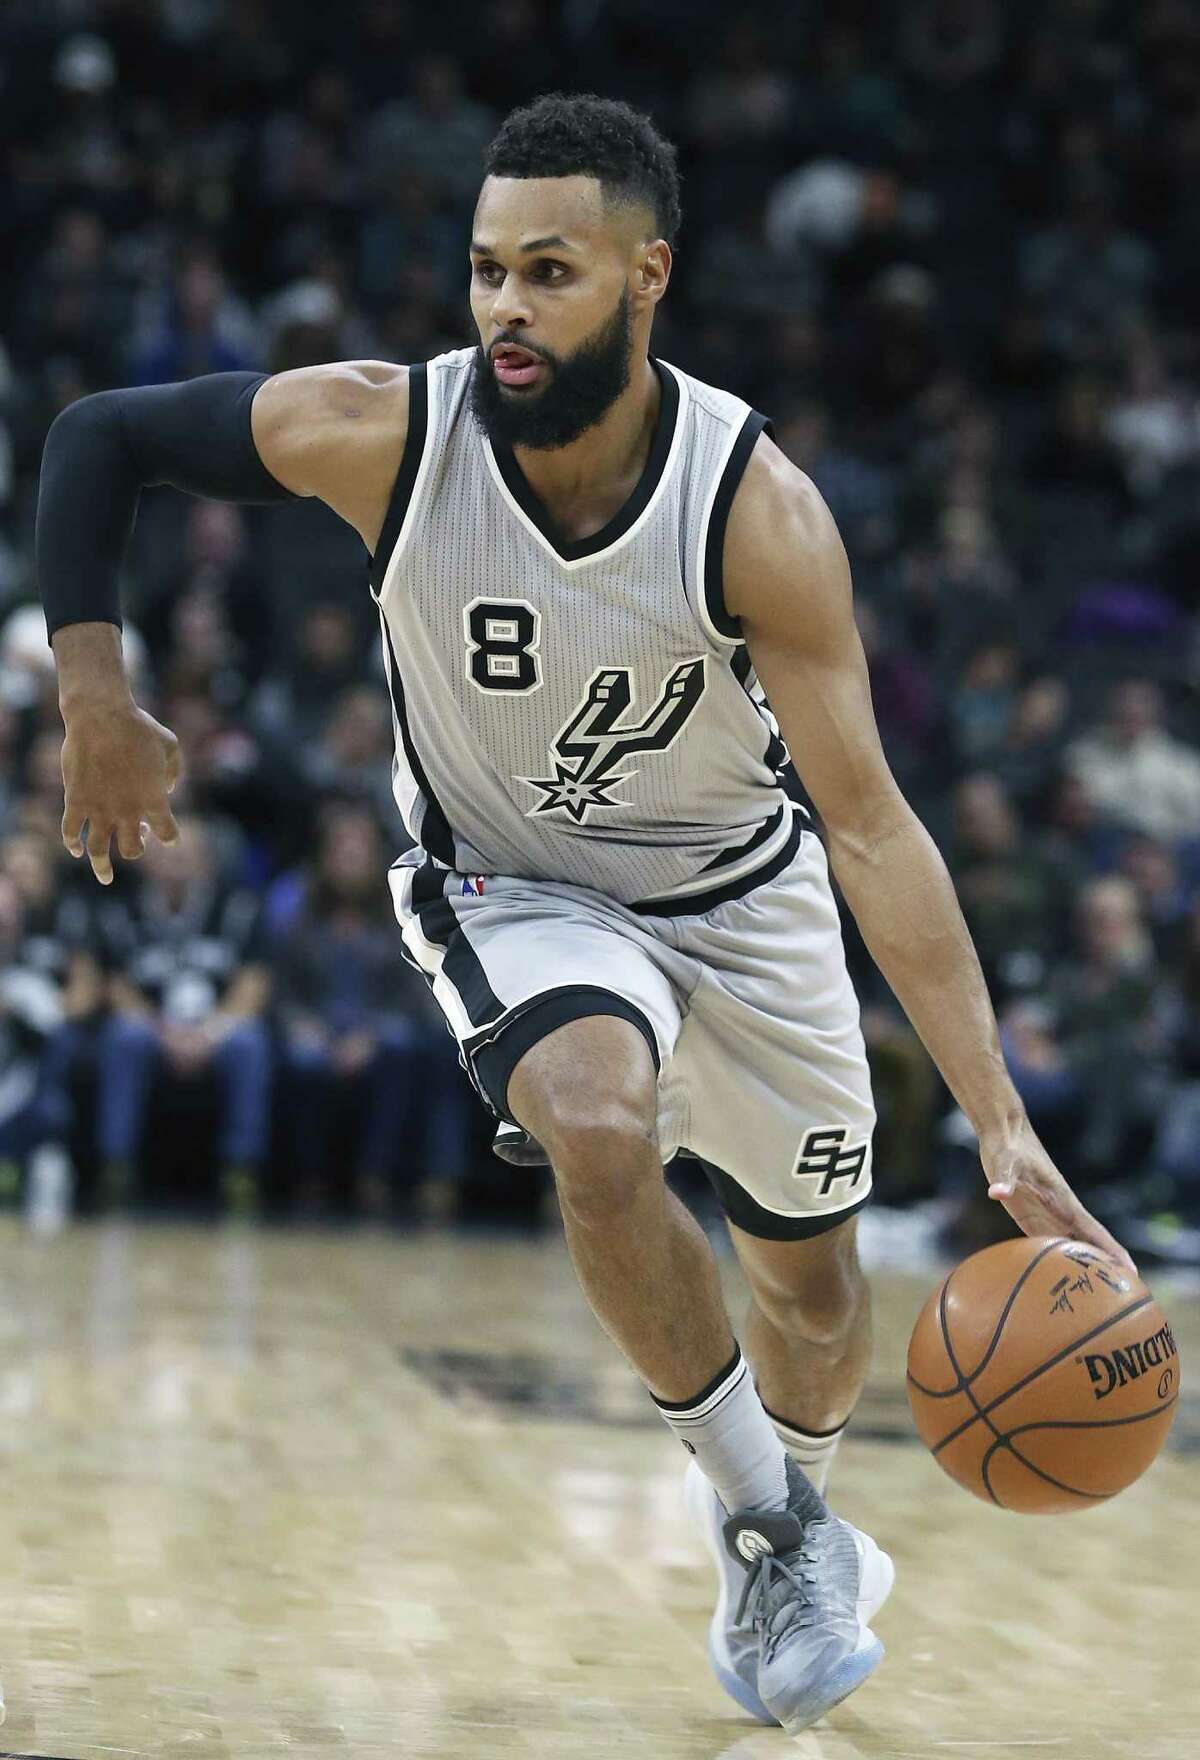 Patty Mills drives downcourt as the Spurs host the Trail Blazers at the AT&T Center on December 30, 2016.